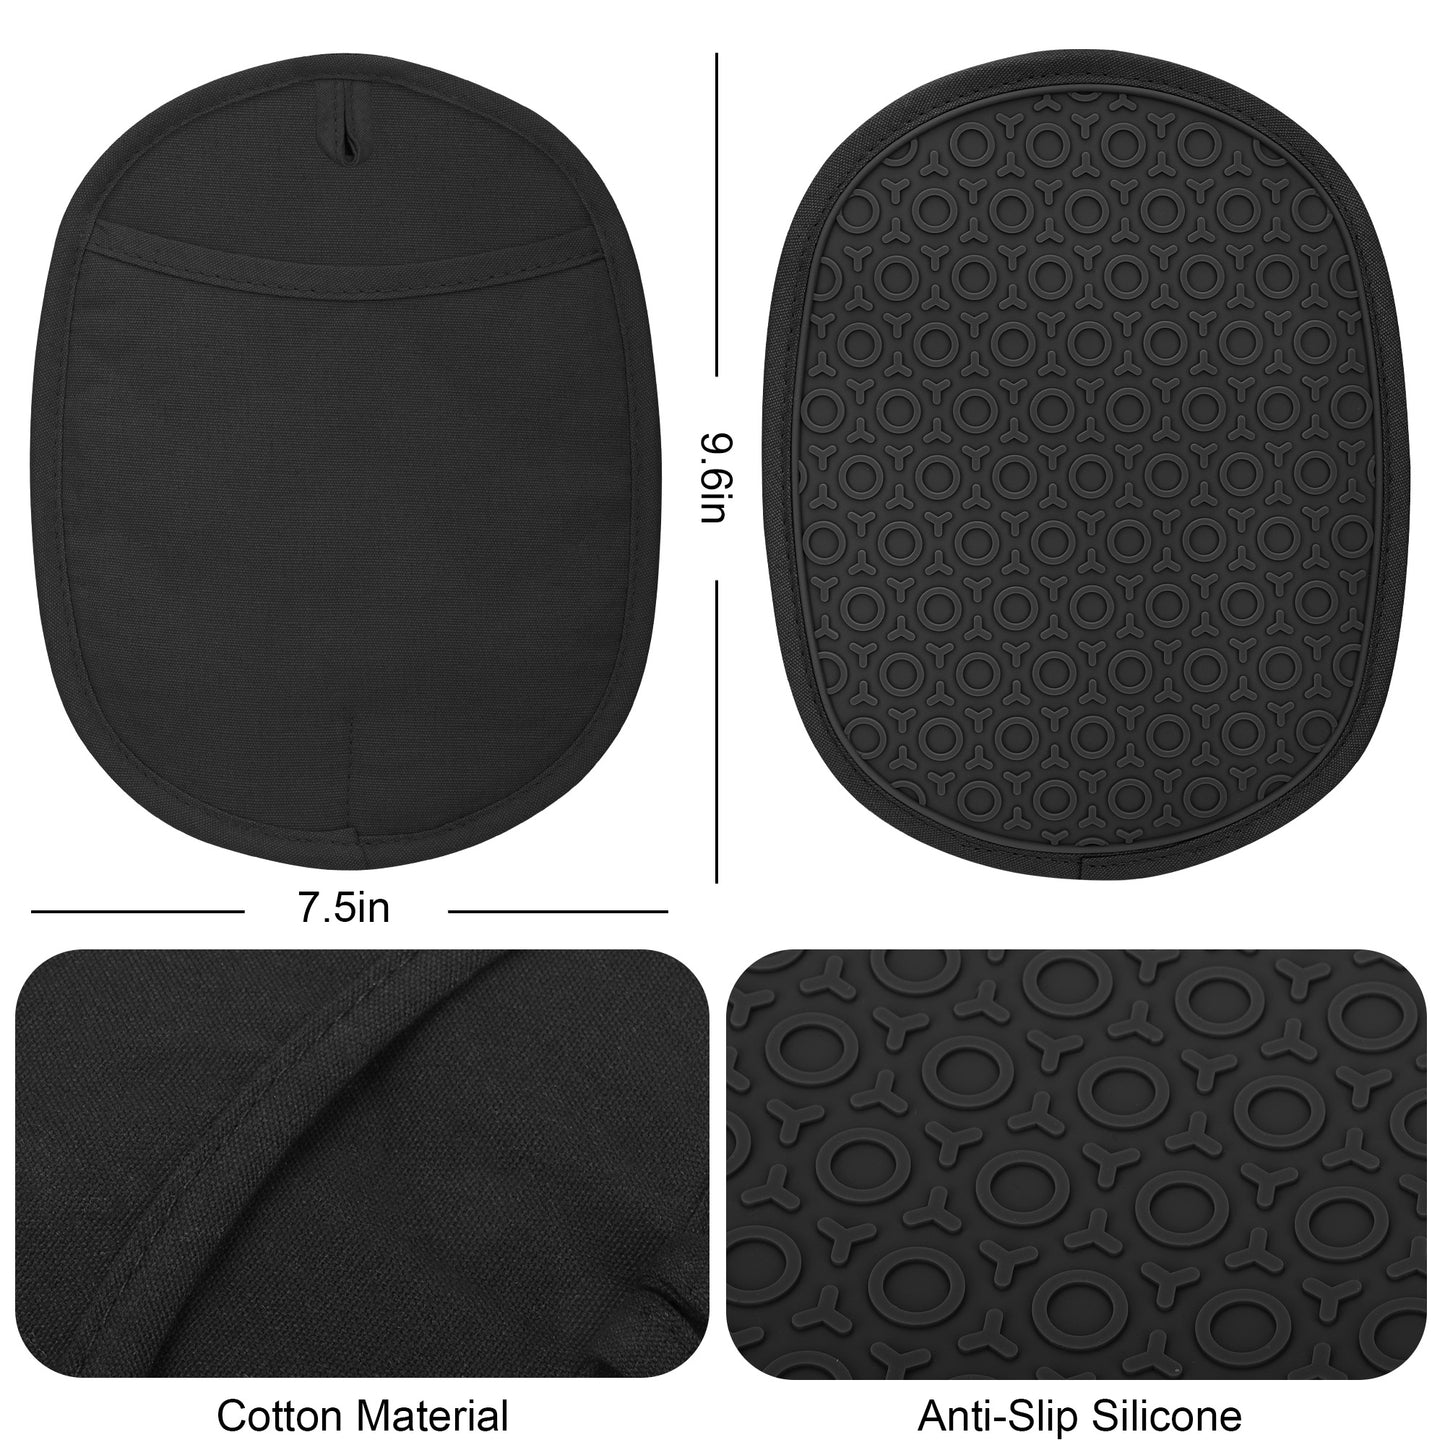 2pcs Silicone Pot Holders- Heat-Resistant Pads with Secure Pockets and Non-Slip Grip for Safe Baking and  Cooking(Black)